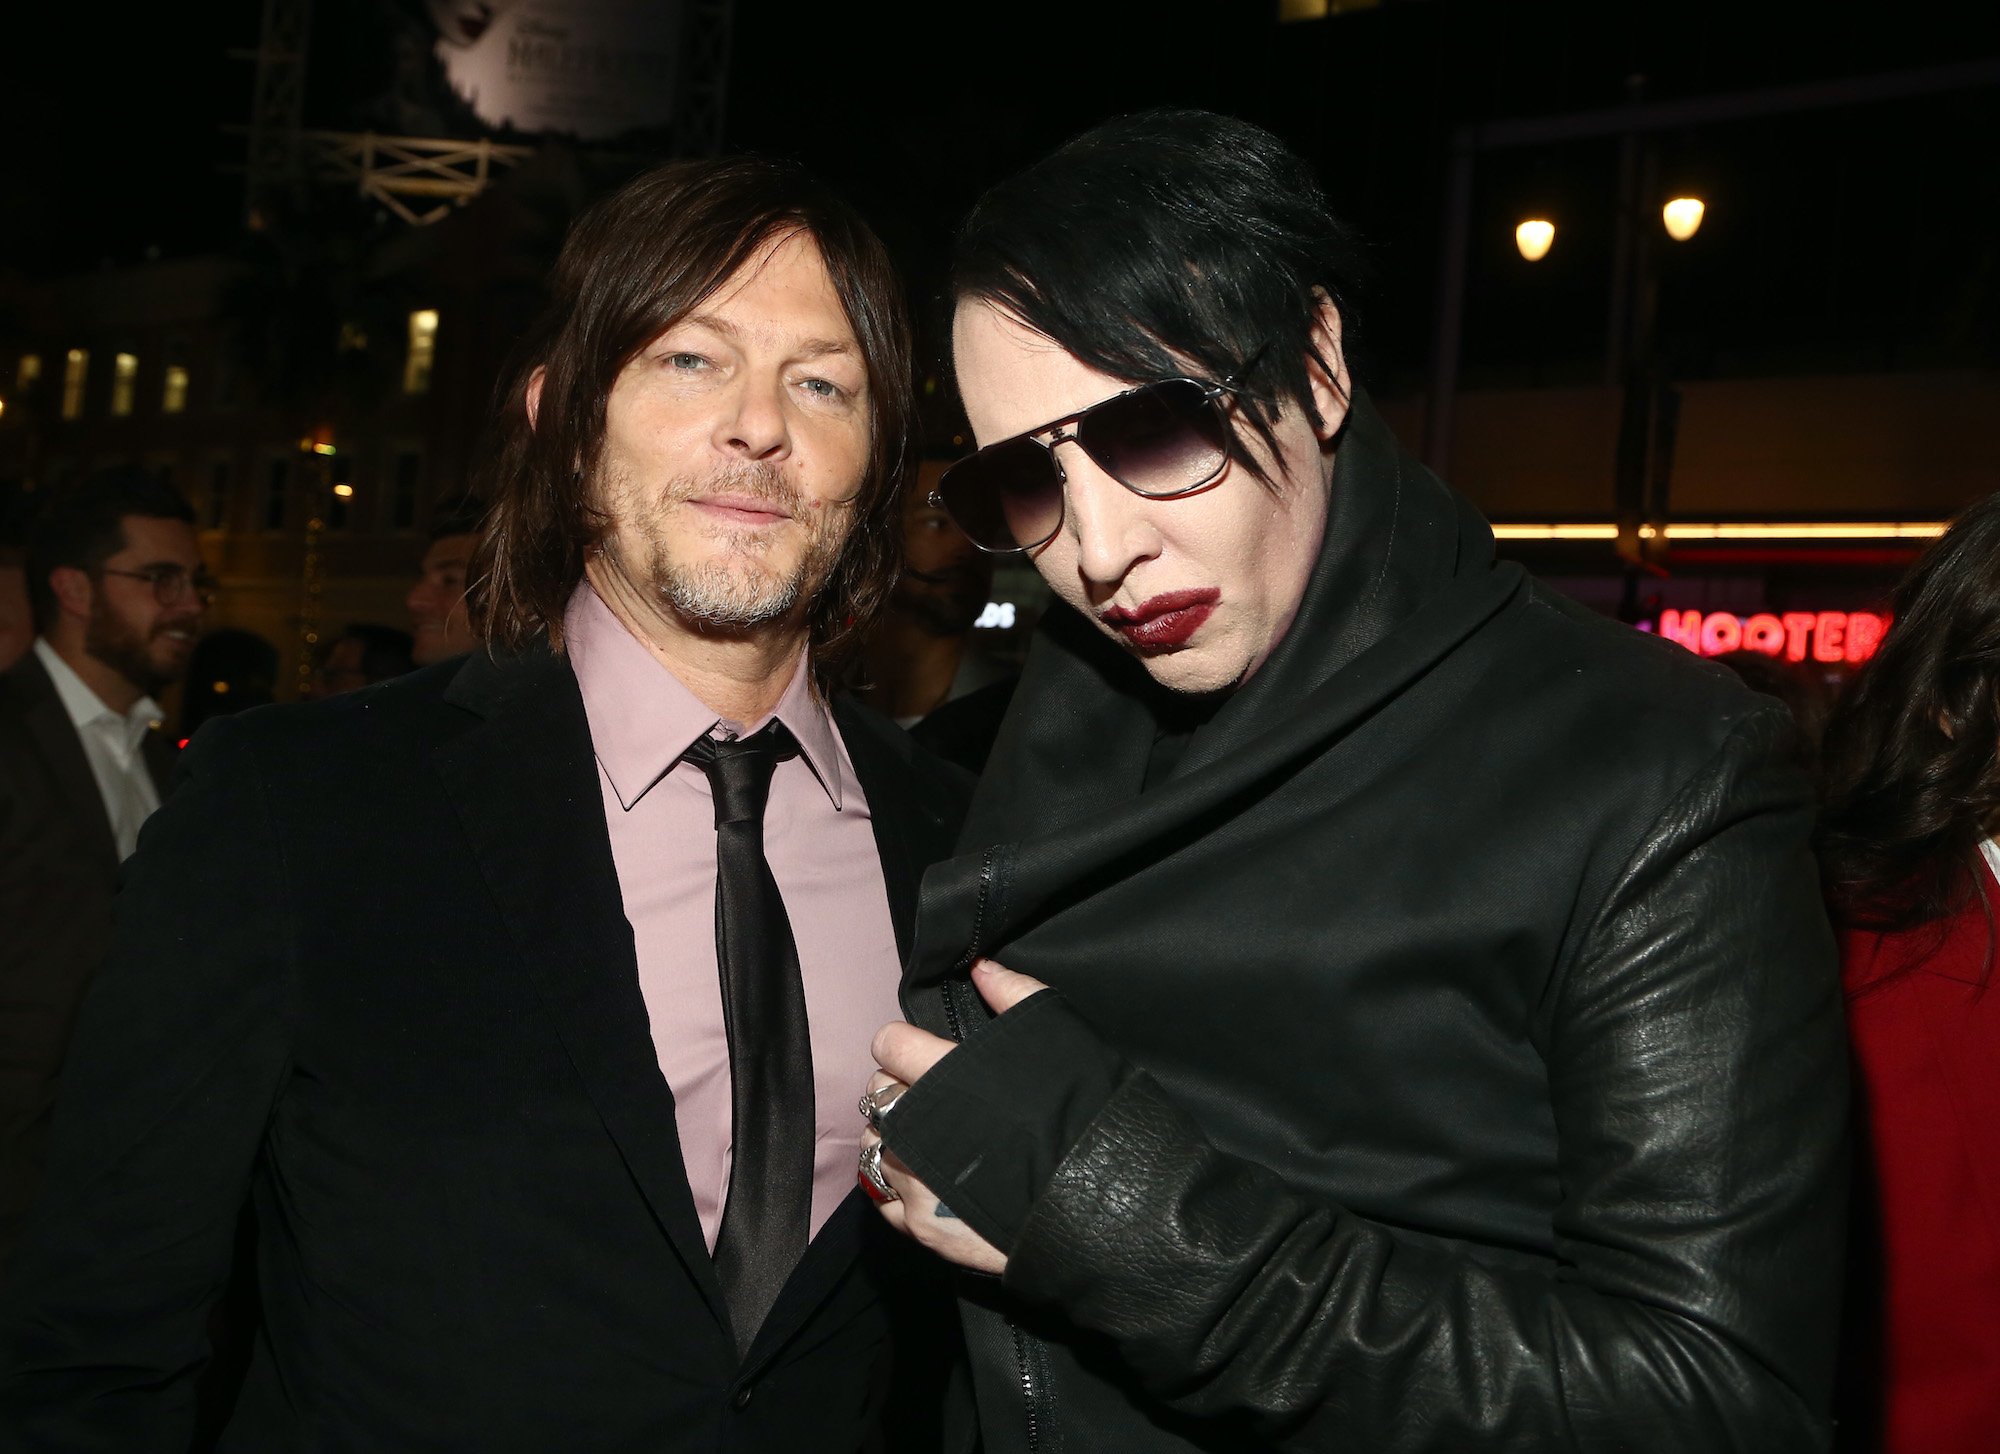 Norman Reedus and Marilyn Manson looking at the camera